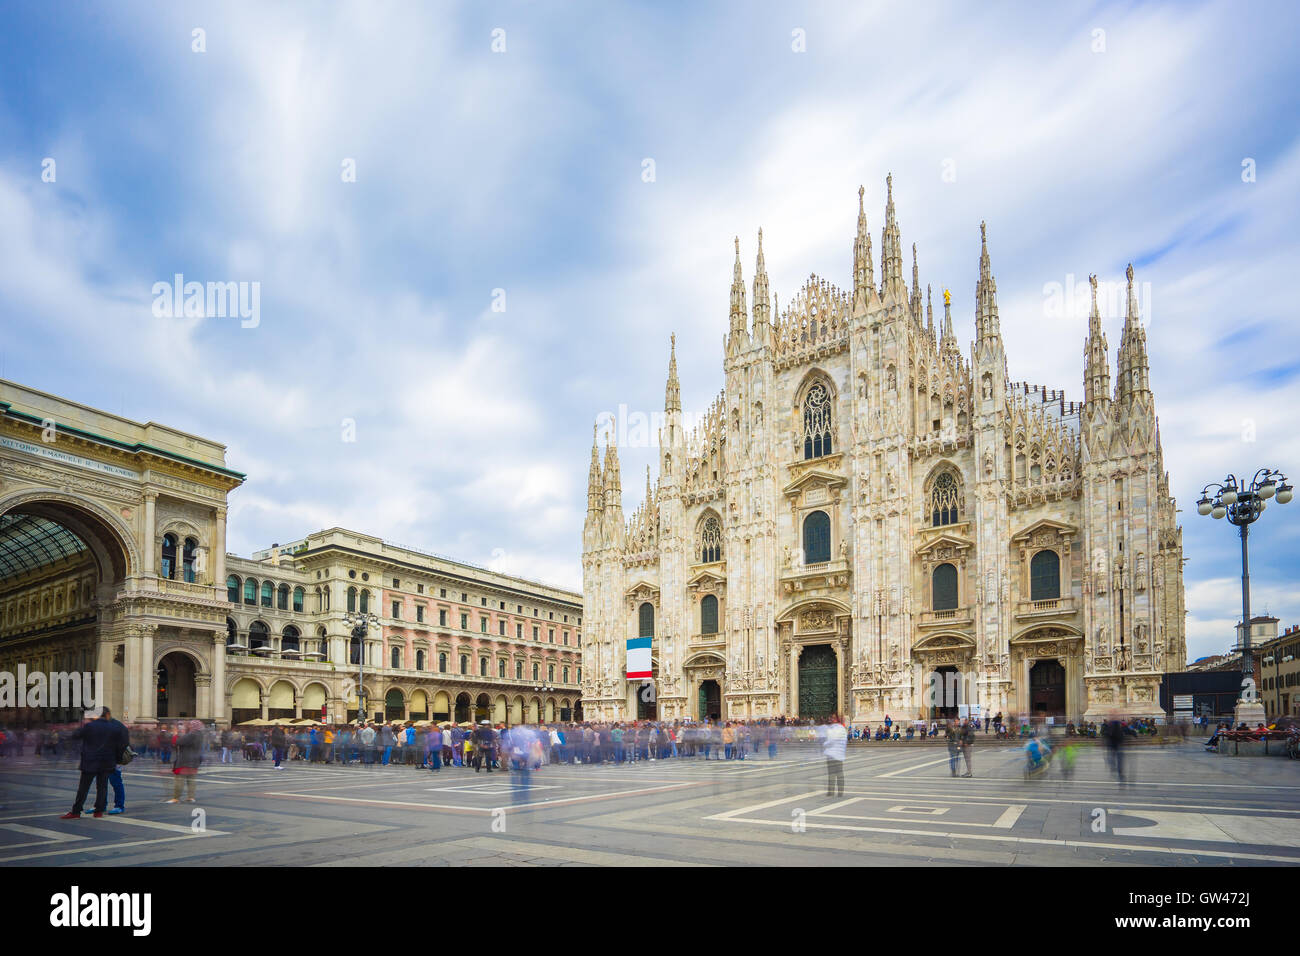 Milan, Italy - April 17, 2016: Piazza del Duomo ("Cathedral Square") is the main piazza (city square) of Milan, Italy. Stock Photo